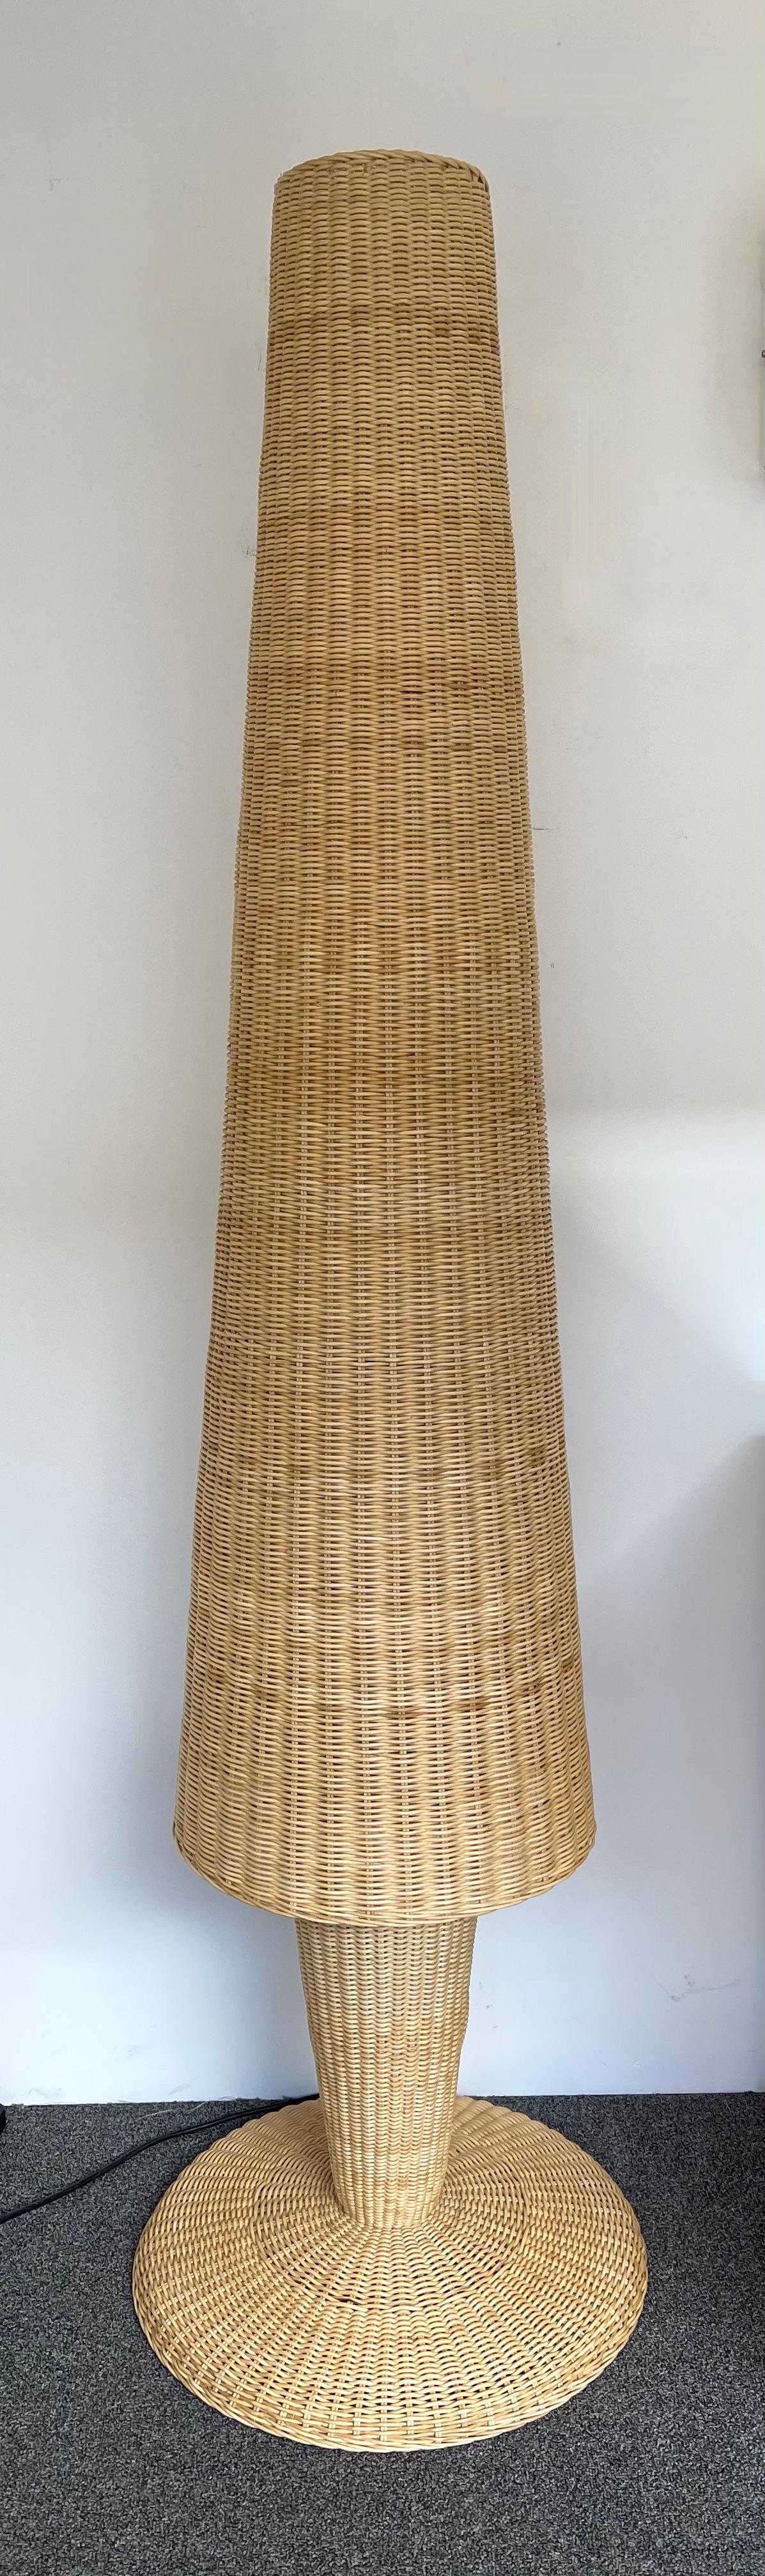 Late 20th Century Rattan Floor Lamp by Gasparucci Italo, Italy, 1980s For Sale